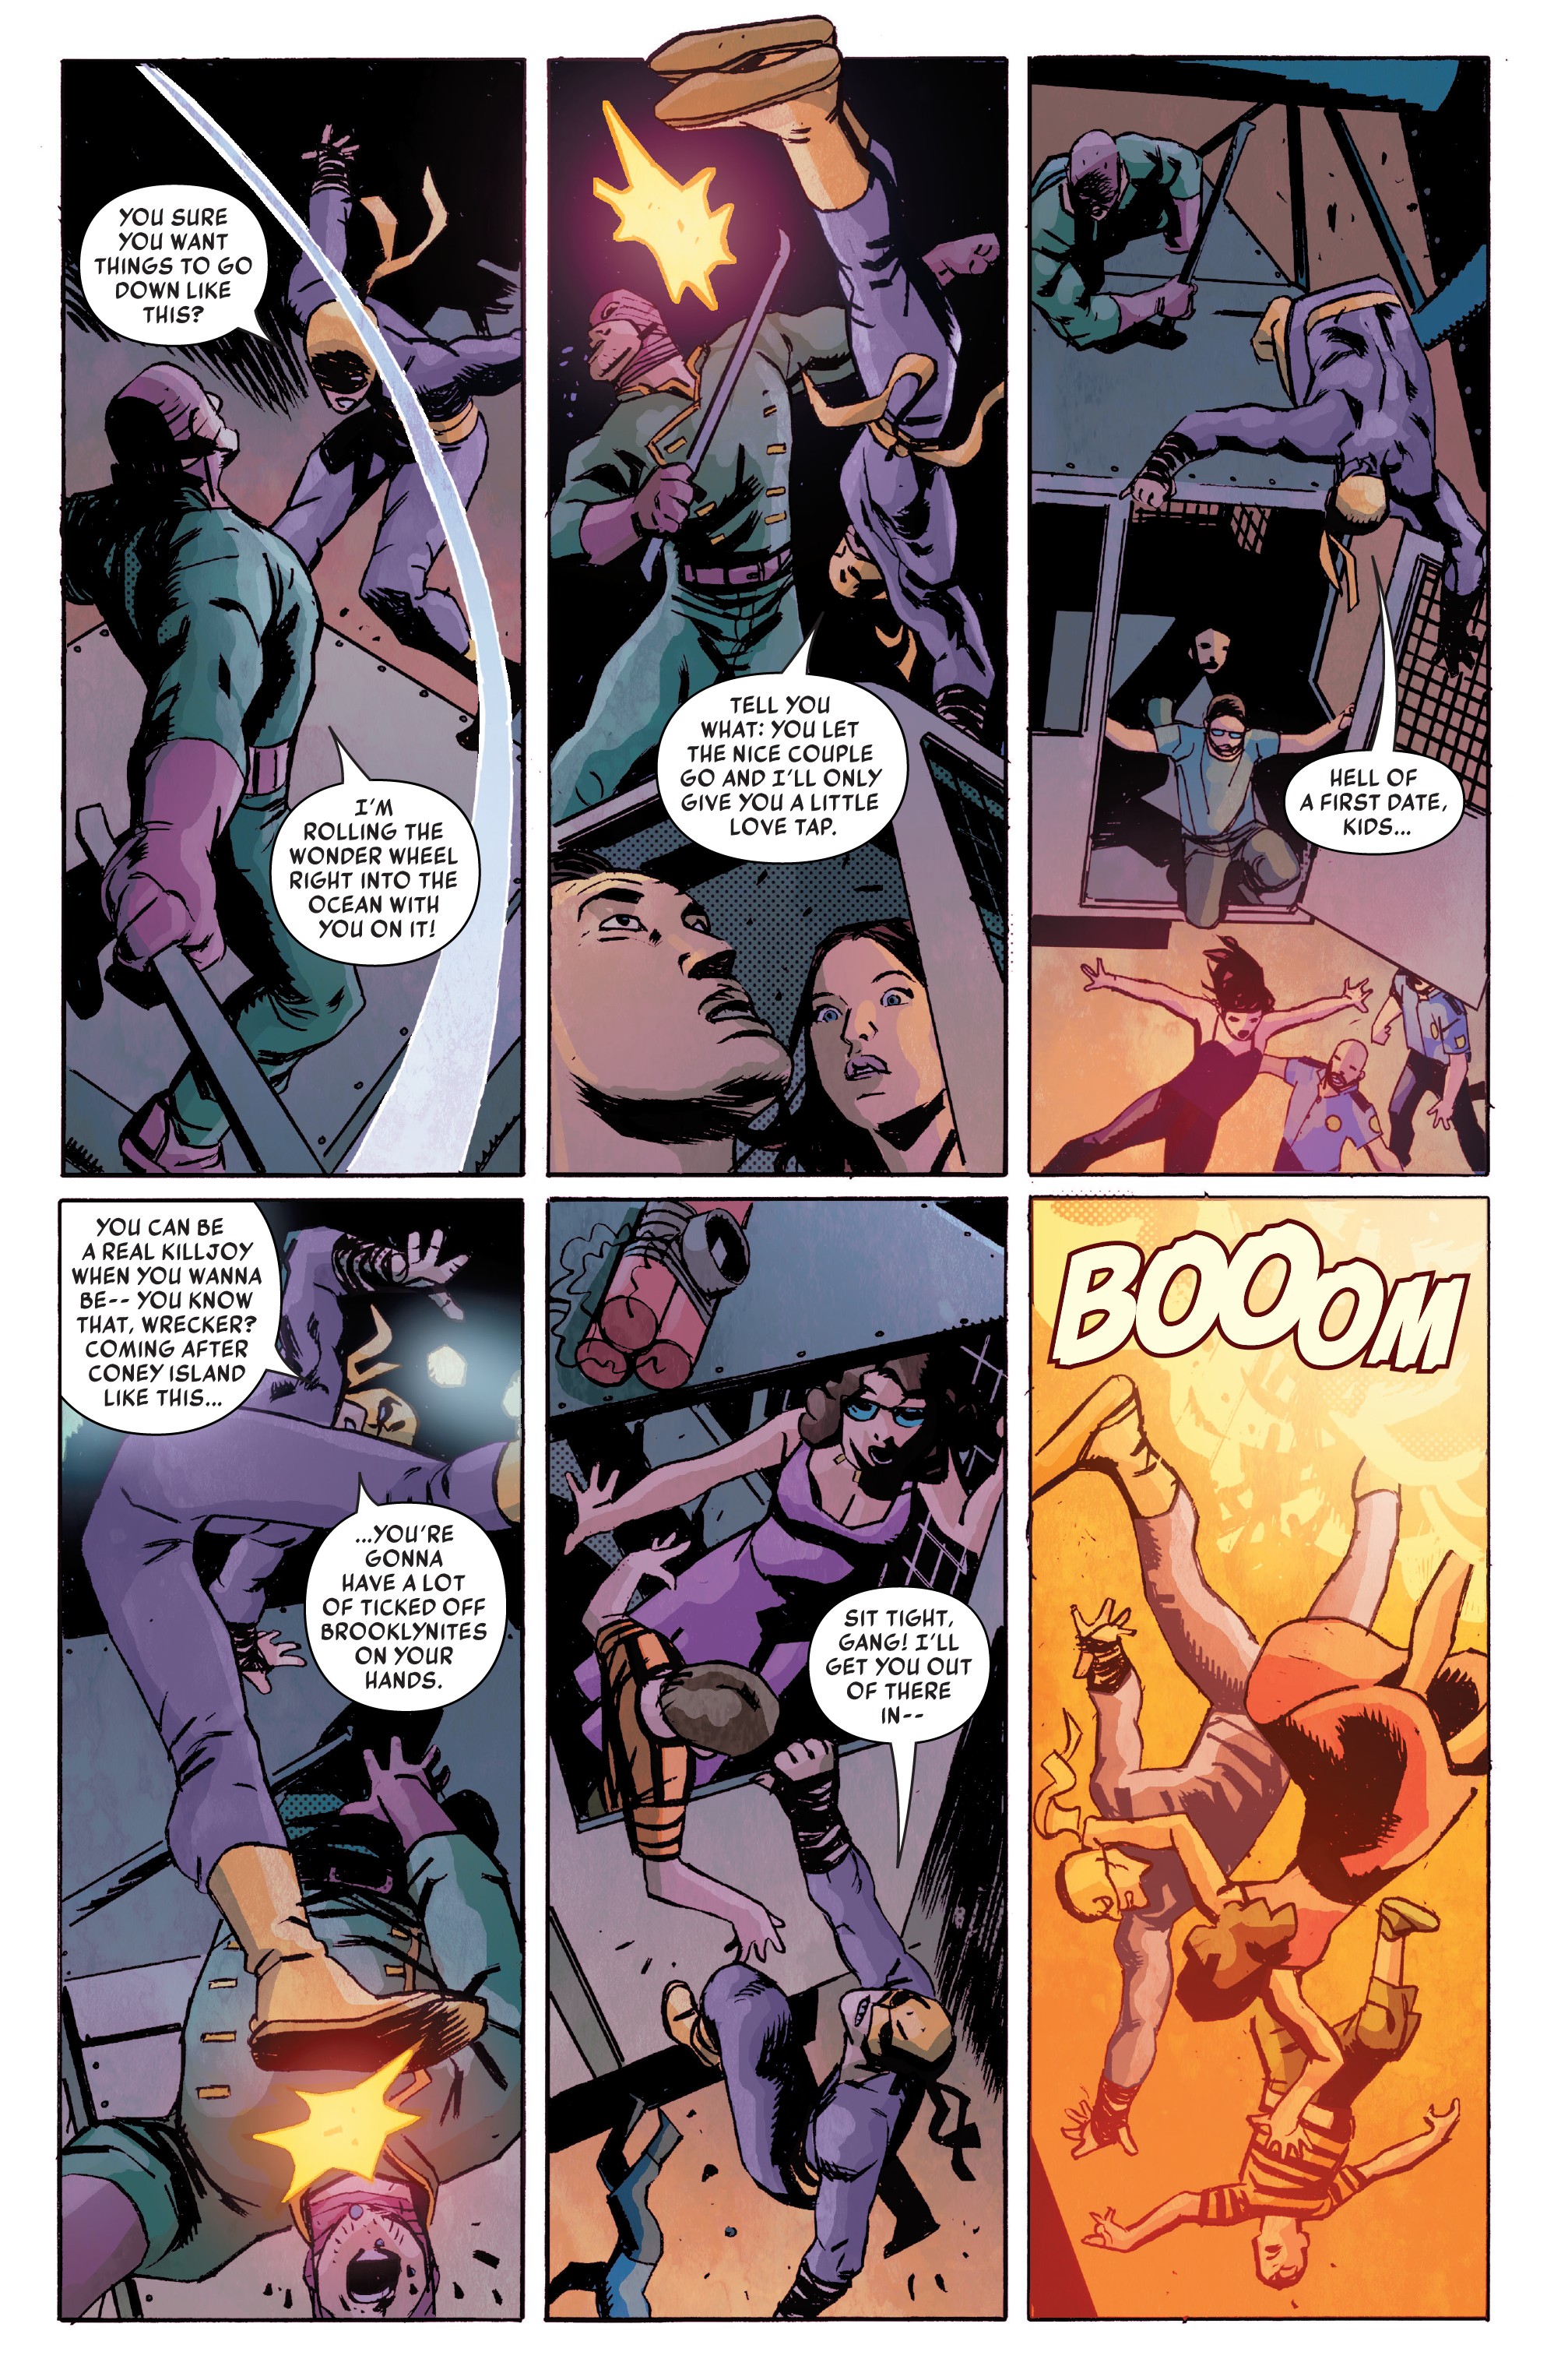 Iron Fist (2018-): Chapter 1 - Page 4